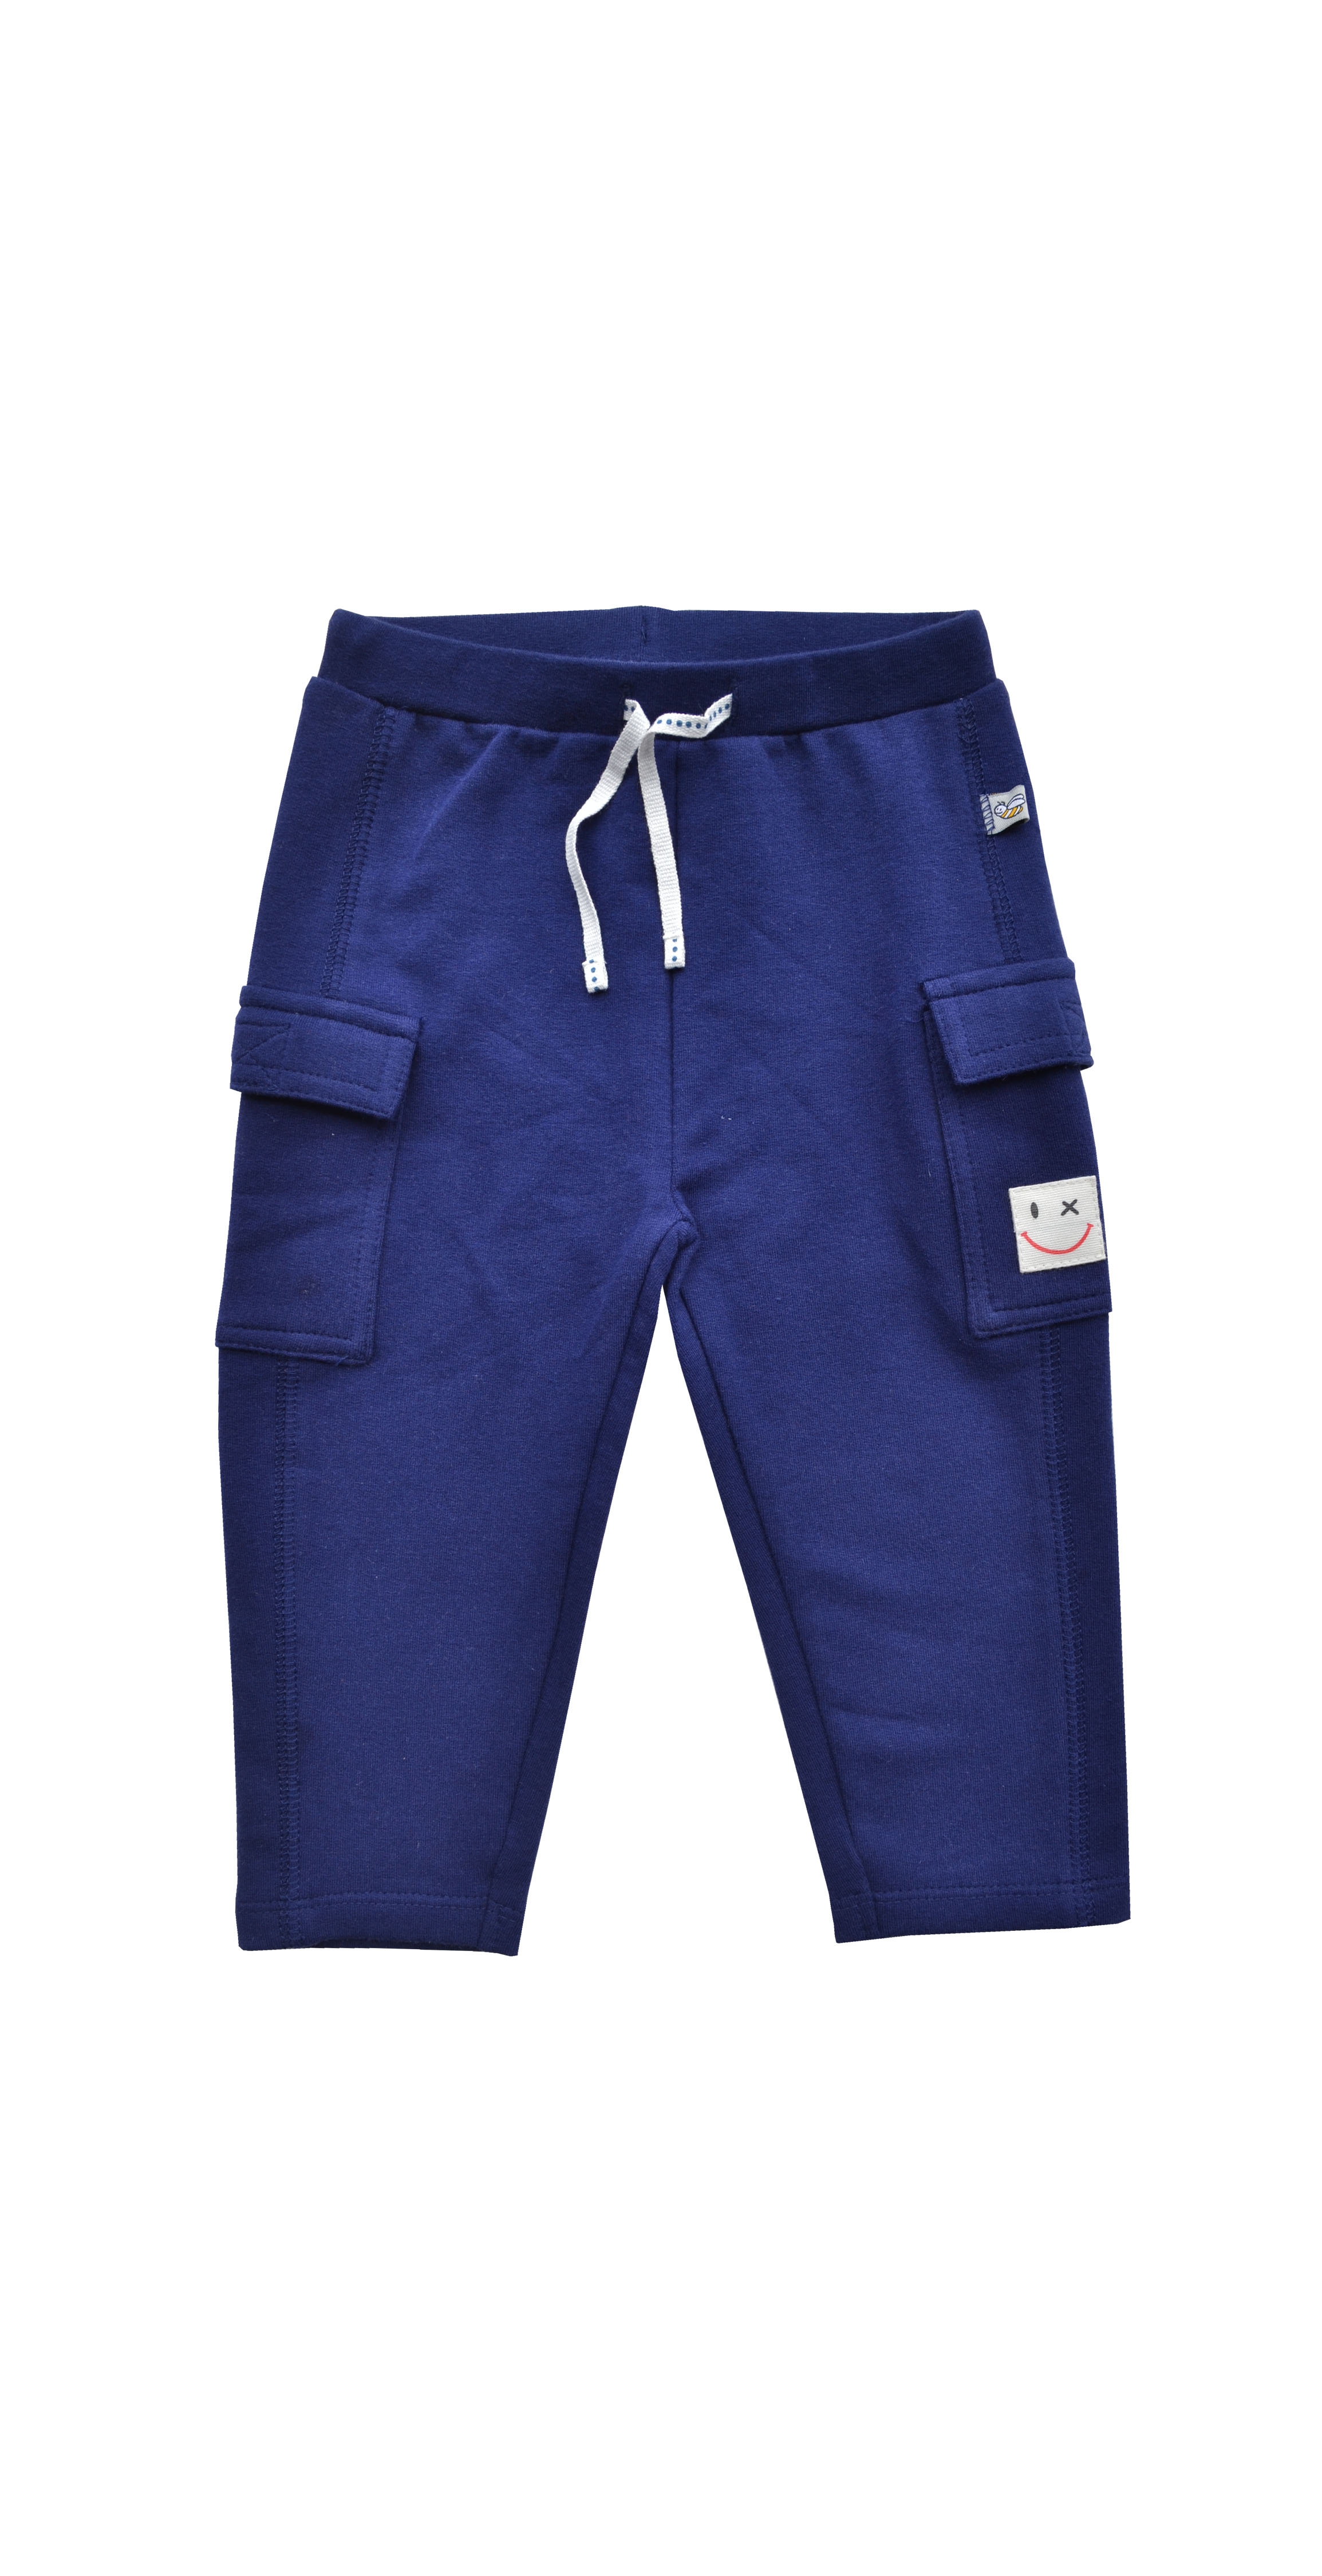 Navy Pant with Cord at Waistband (100% Cotton Unbrushed Fleece)